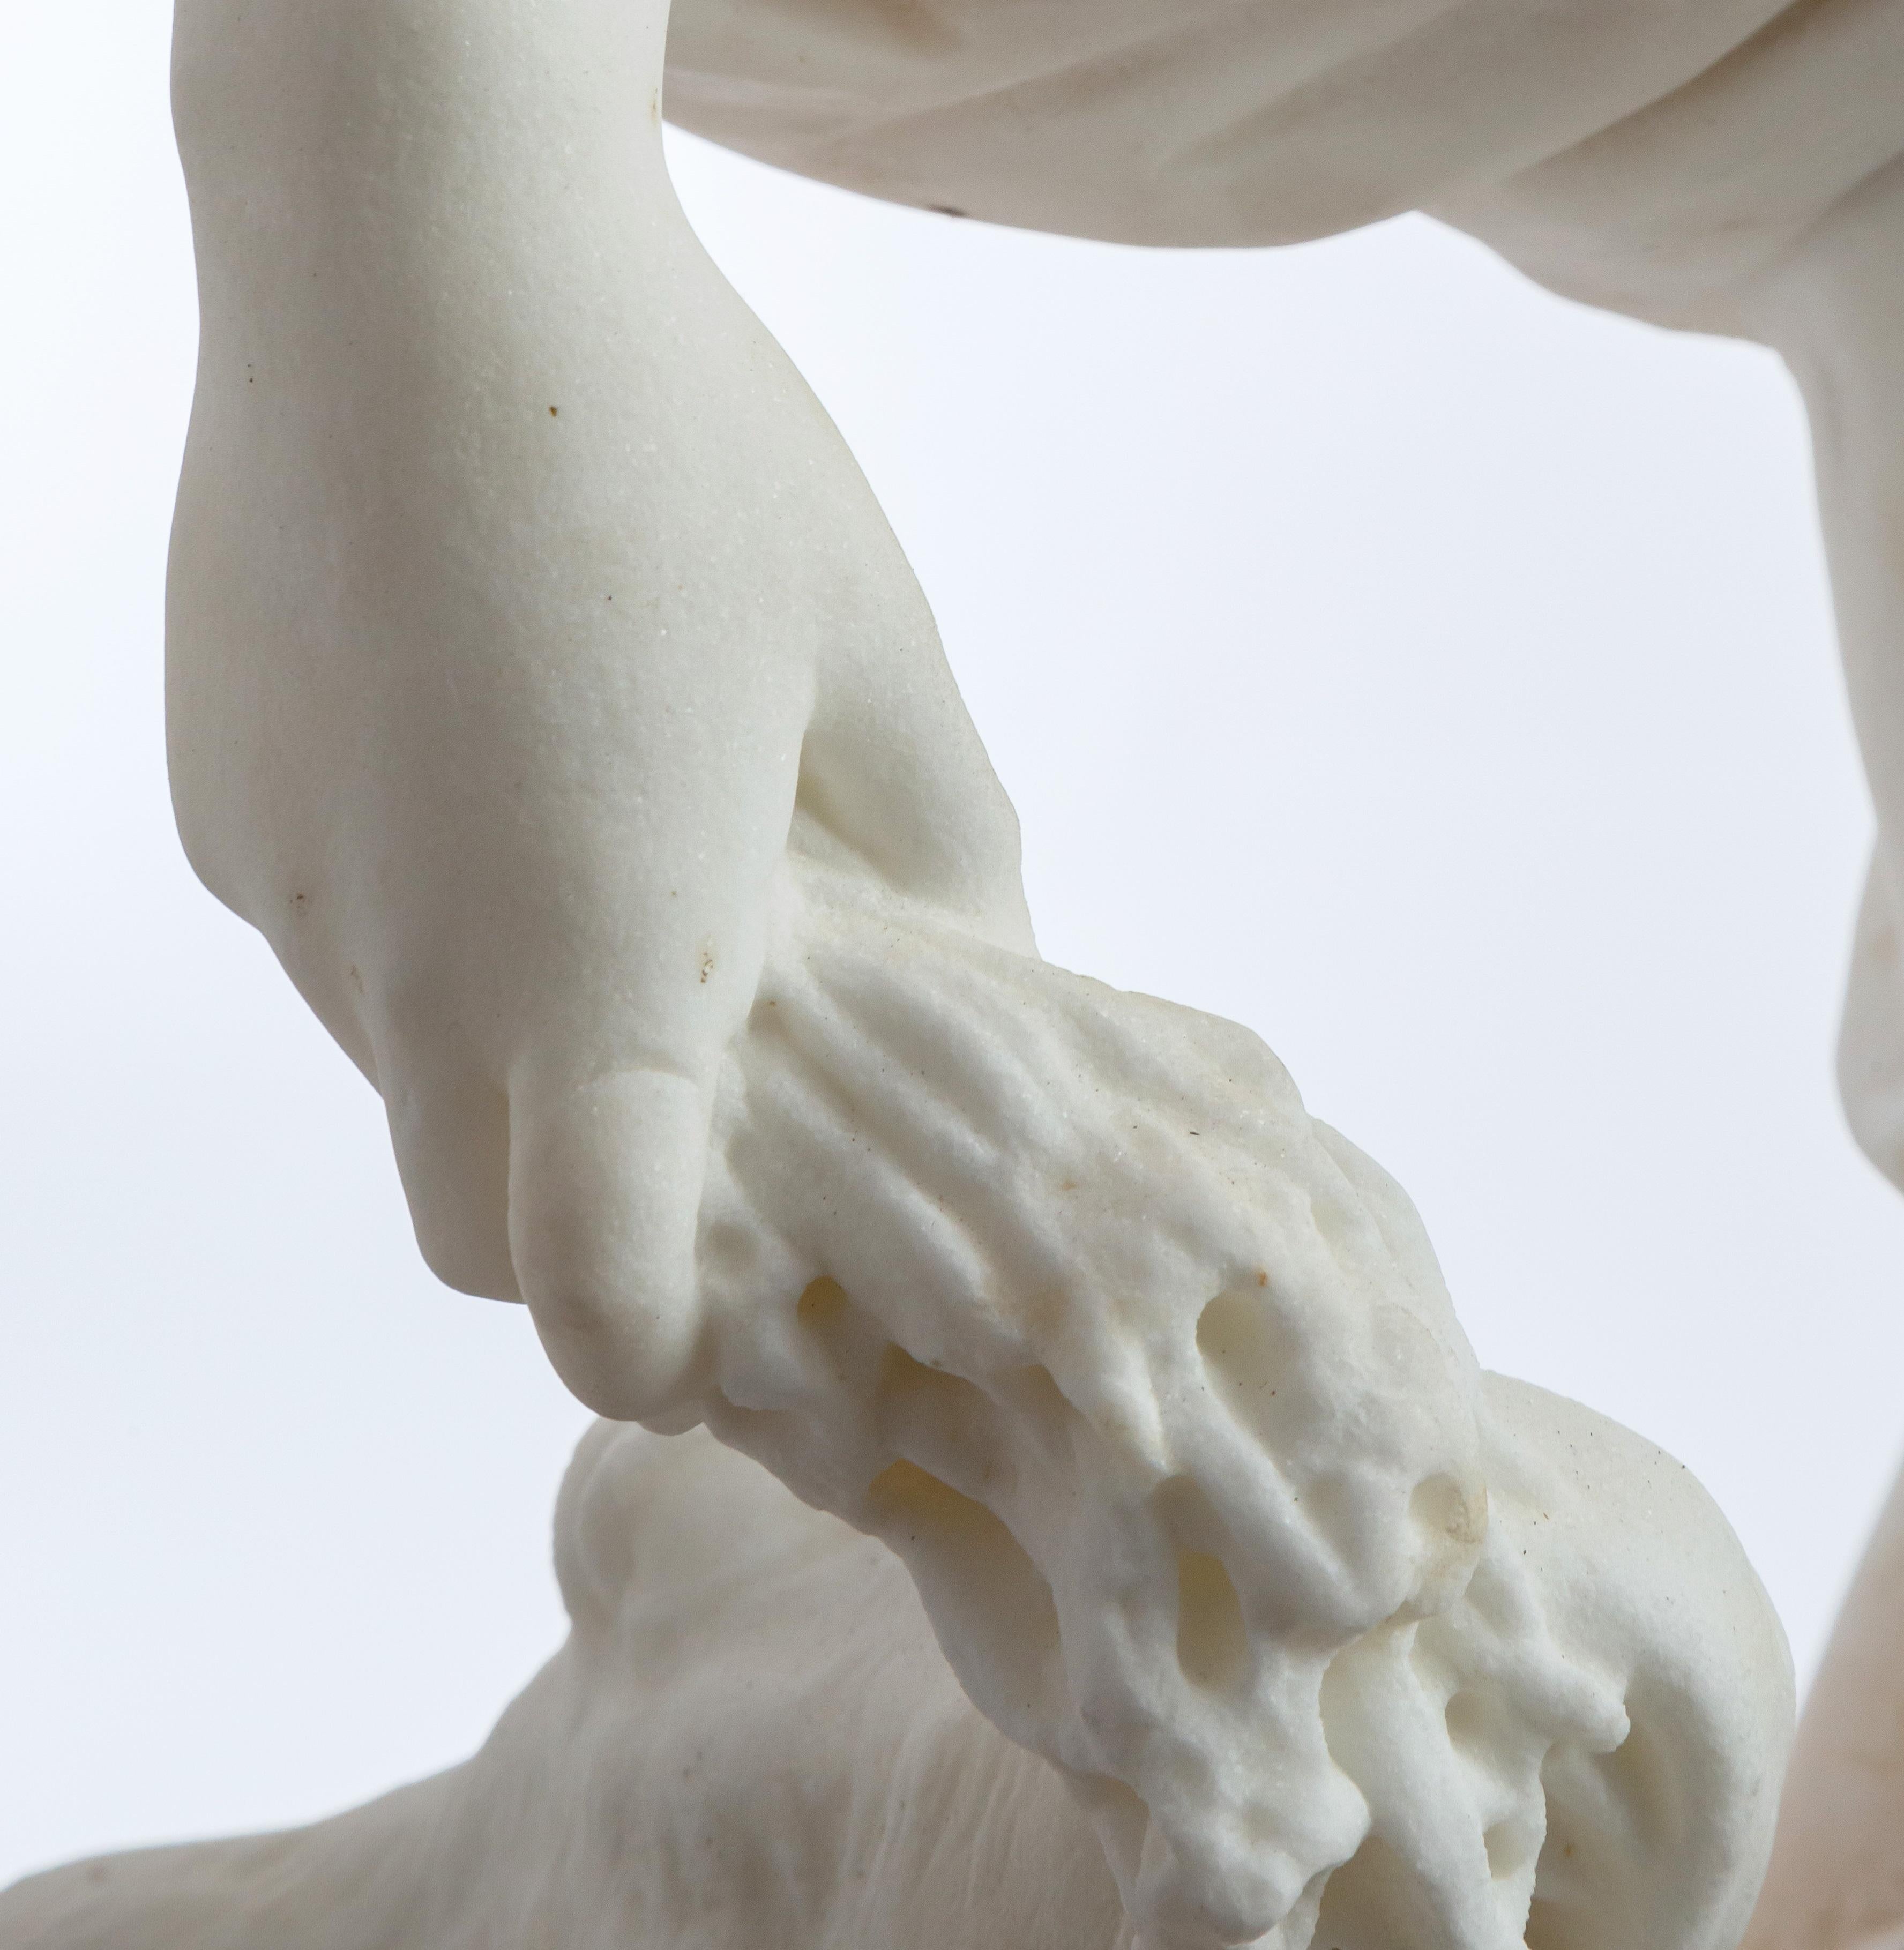 Le Retour des Champs ‘Return from the Harvest’ Carrara Marble, Signed and Dated 12